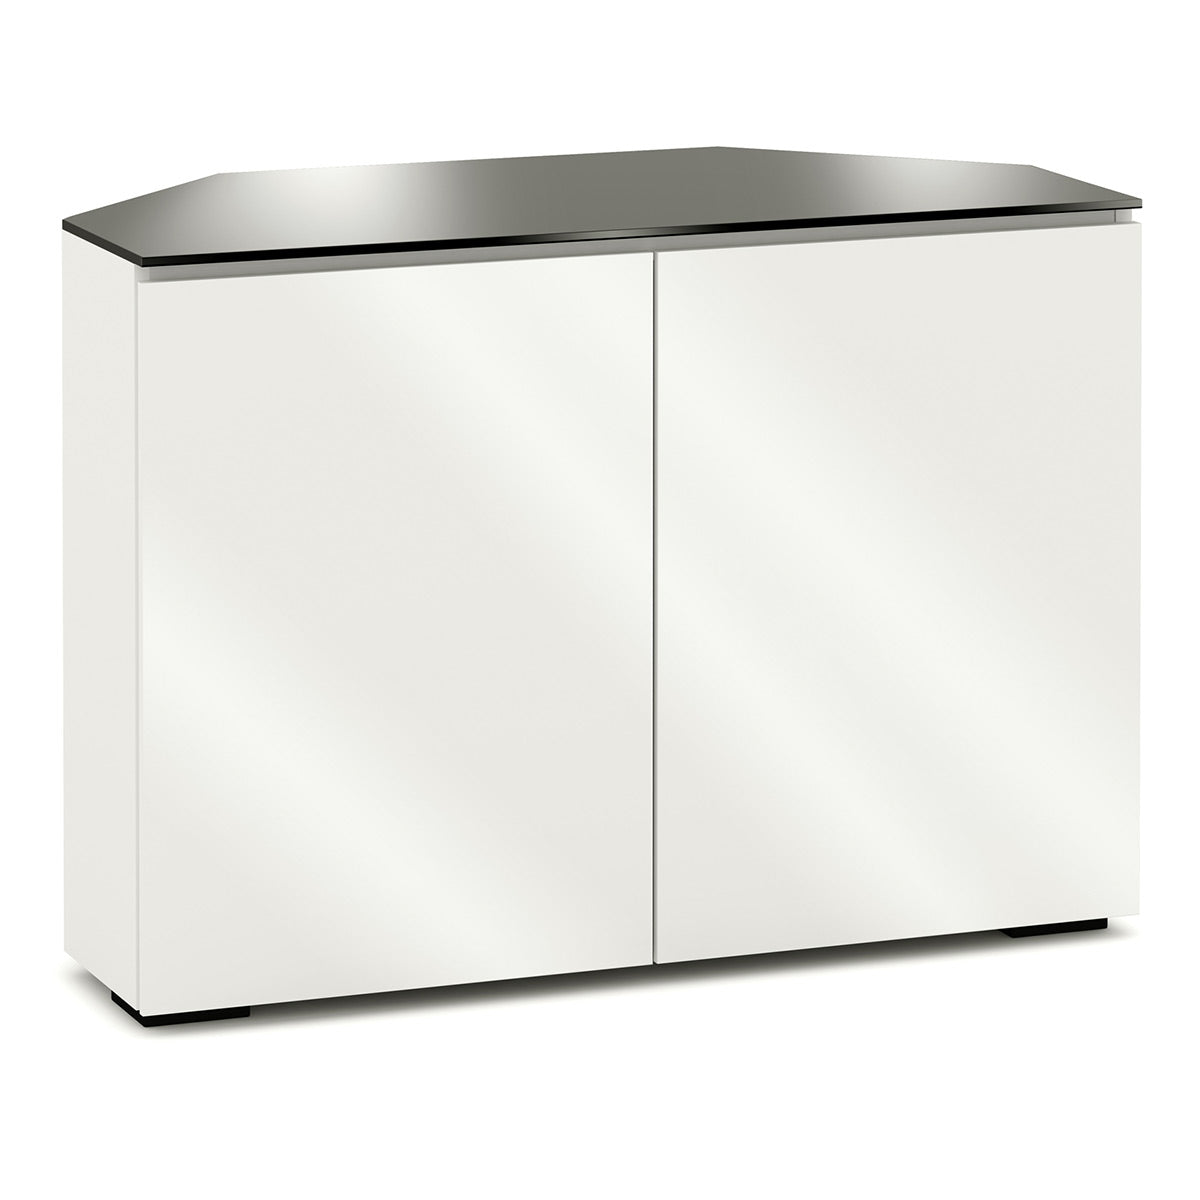 Salamander Chameleon Collection Miami 323 Twin Corner AV Cabinet (High Gloss White with Black Glass Top)